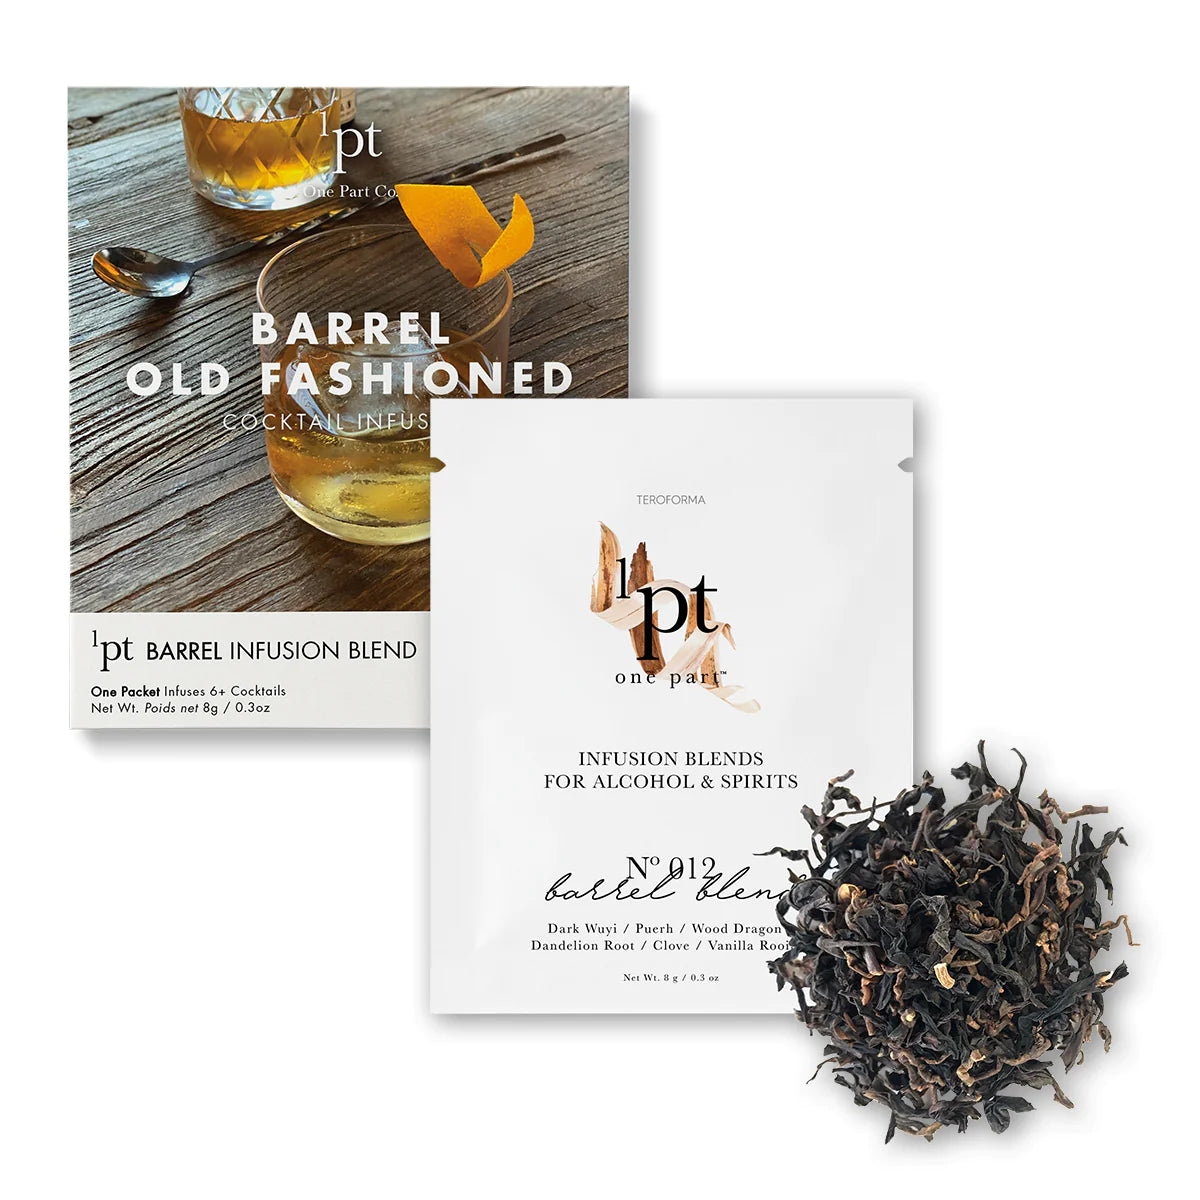 Barrel Old Fashioned Cocktail Infusion Kit